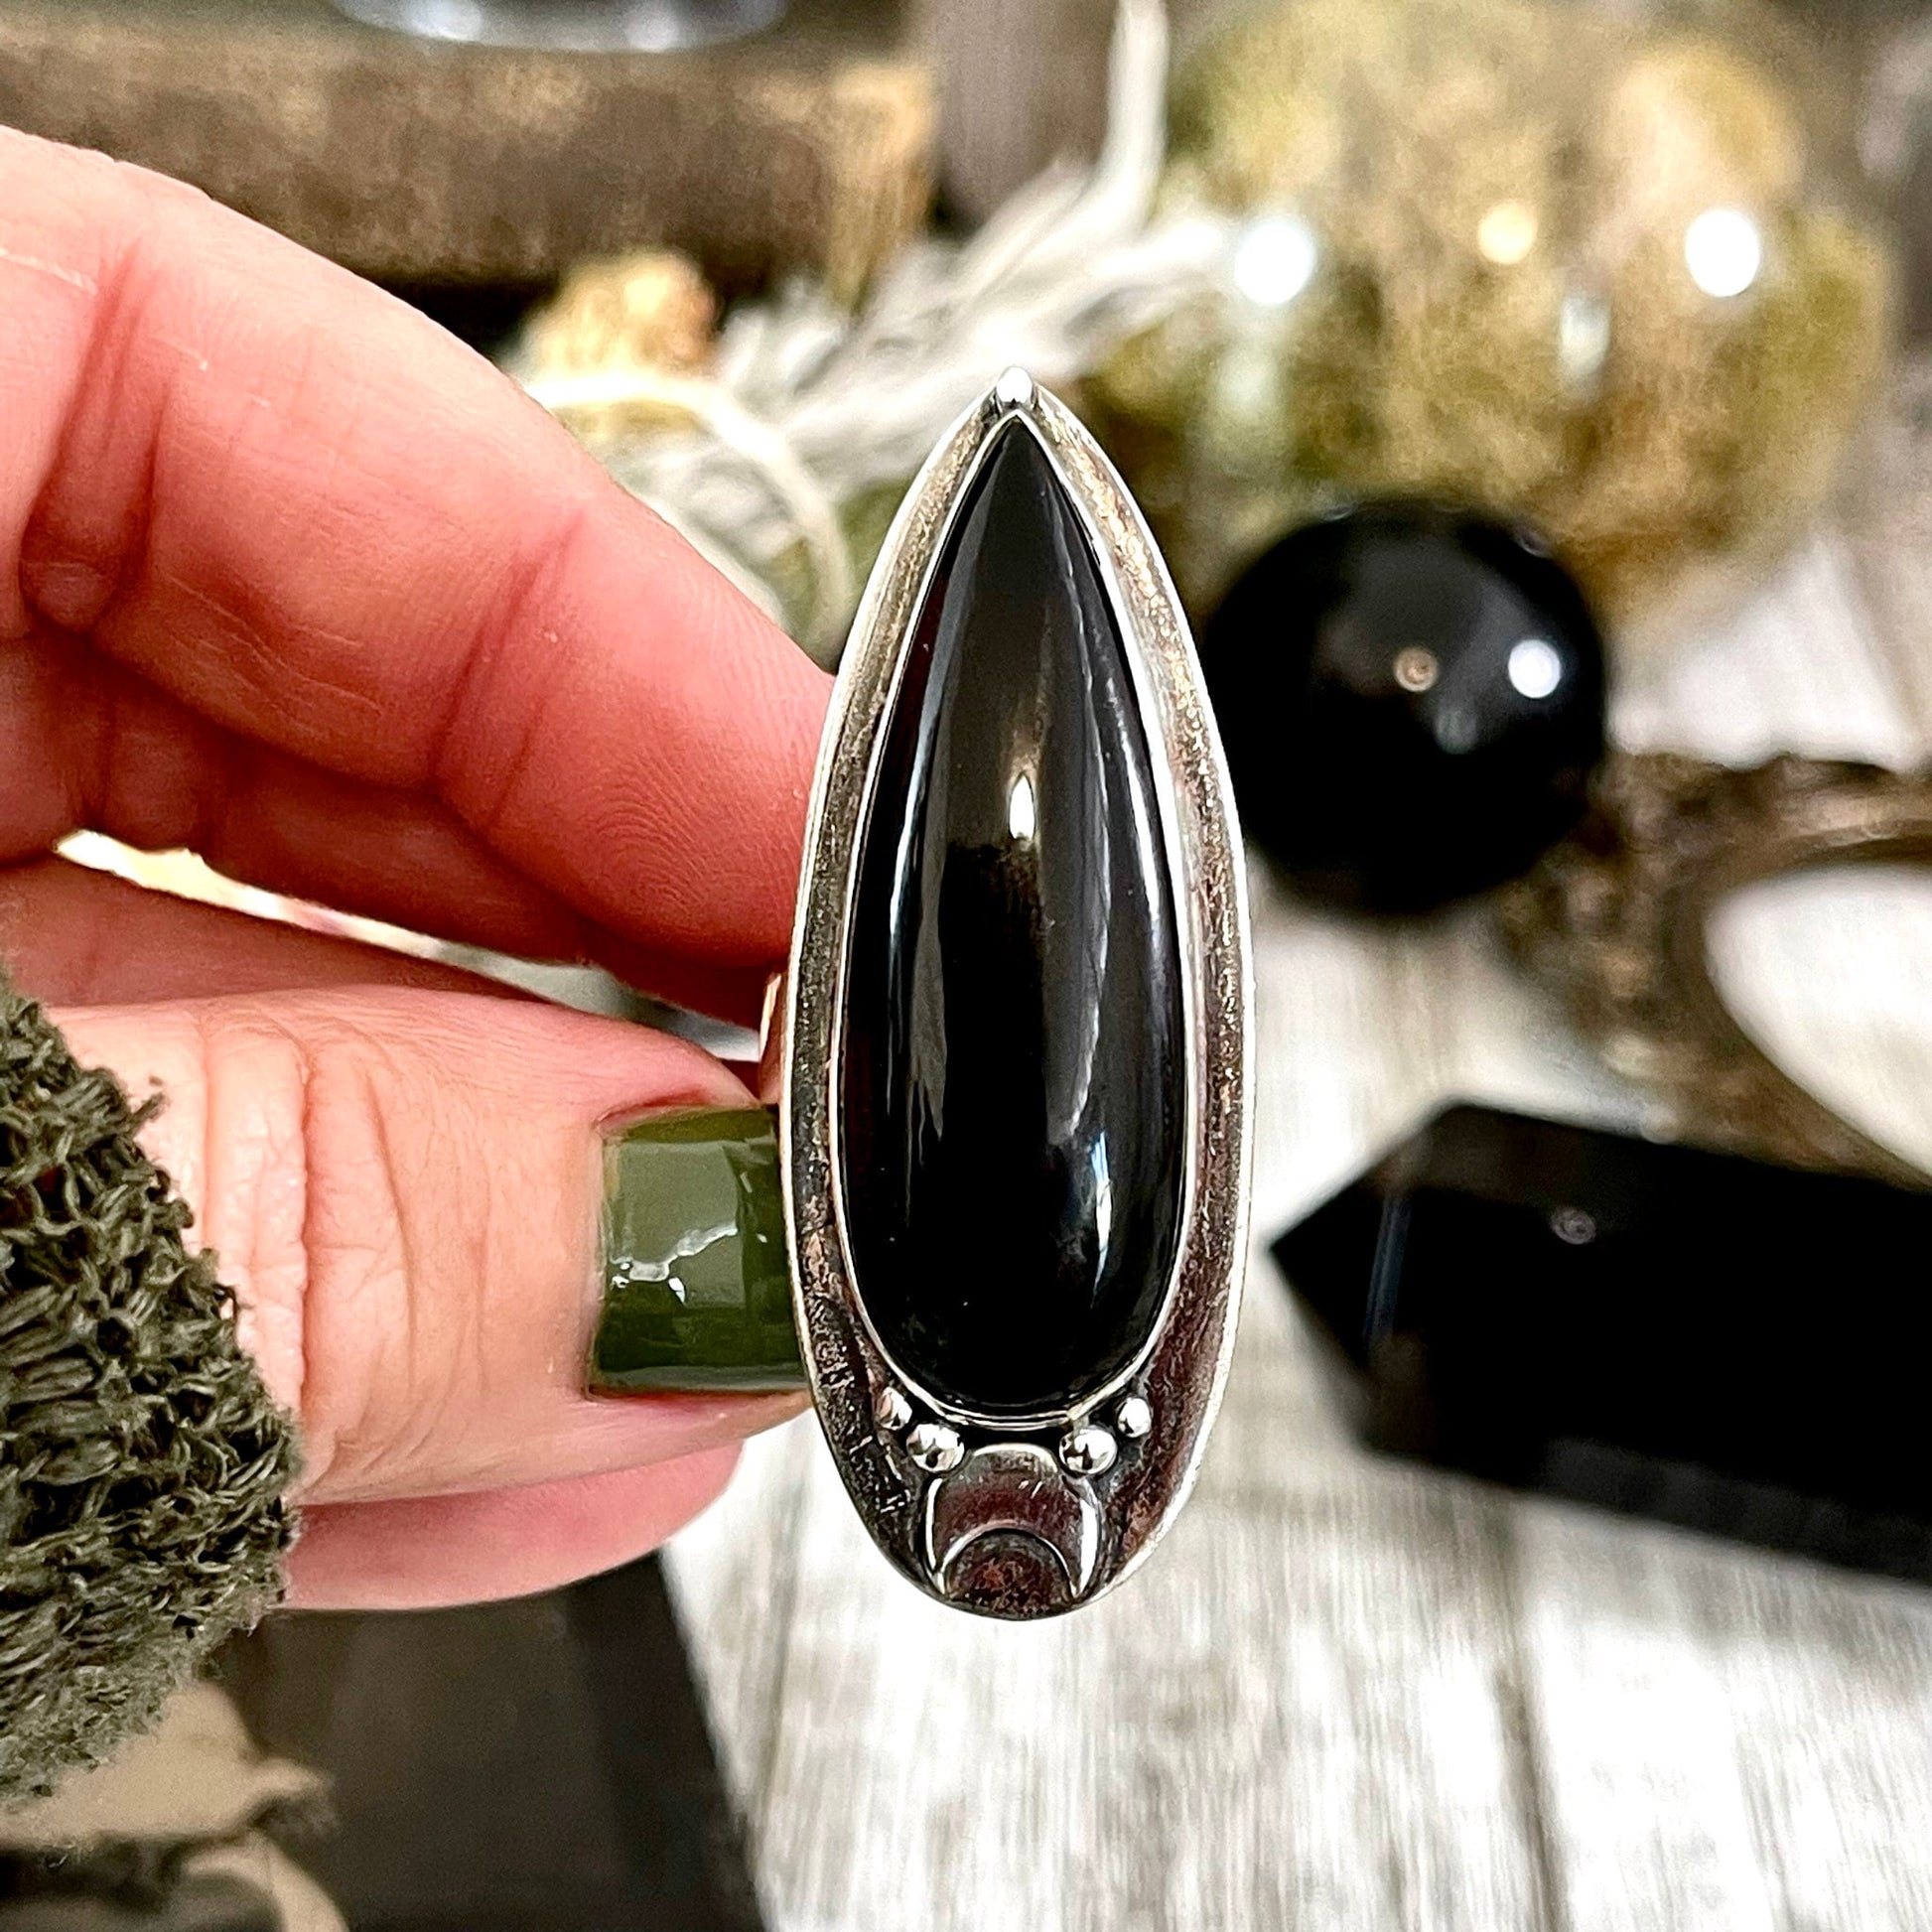 Magic Moons Black Onyx Ring in Sterling Silver / Designed by FOXLARK C